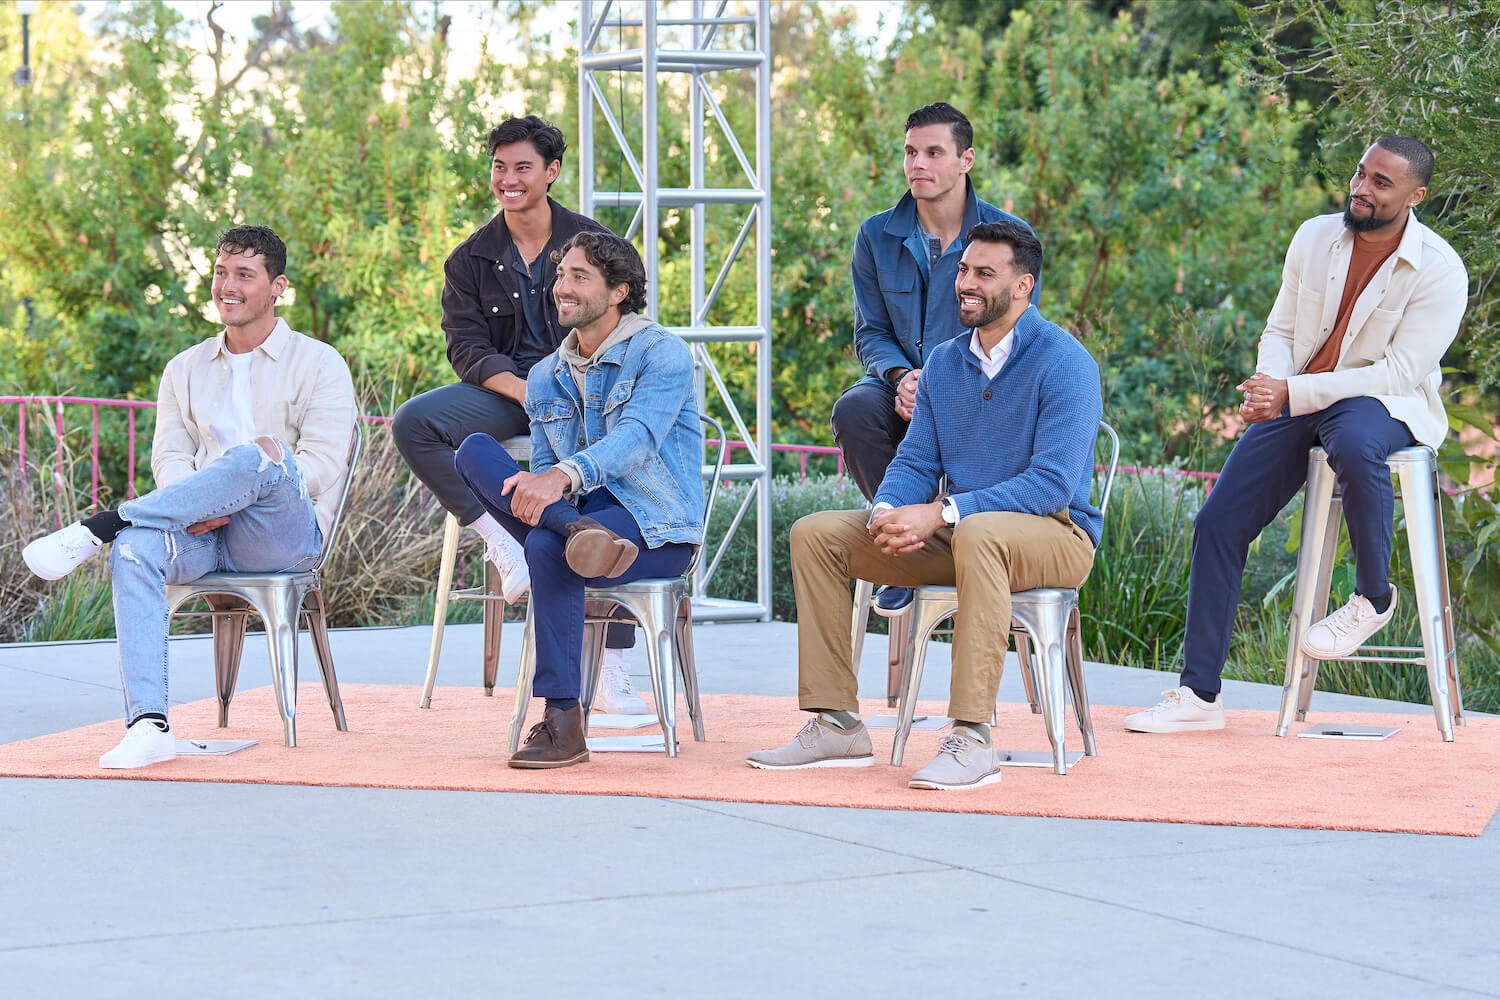 Men from Charity Lawson's season of 'The Bachelorette' 2023 sitting in chairs during a group date in episode 3